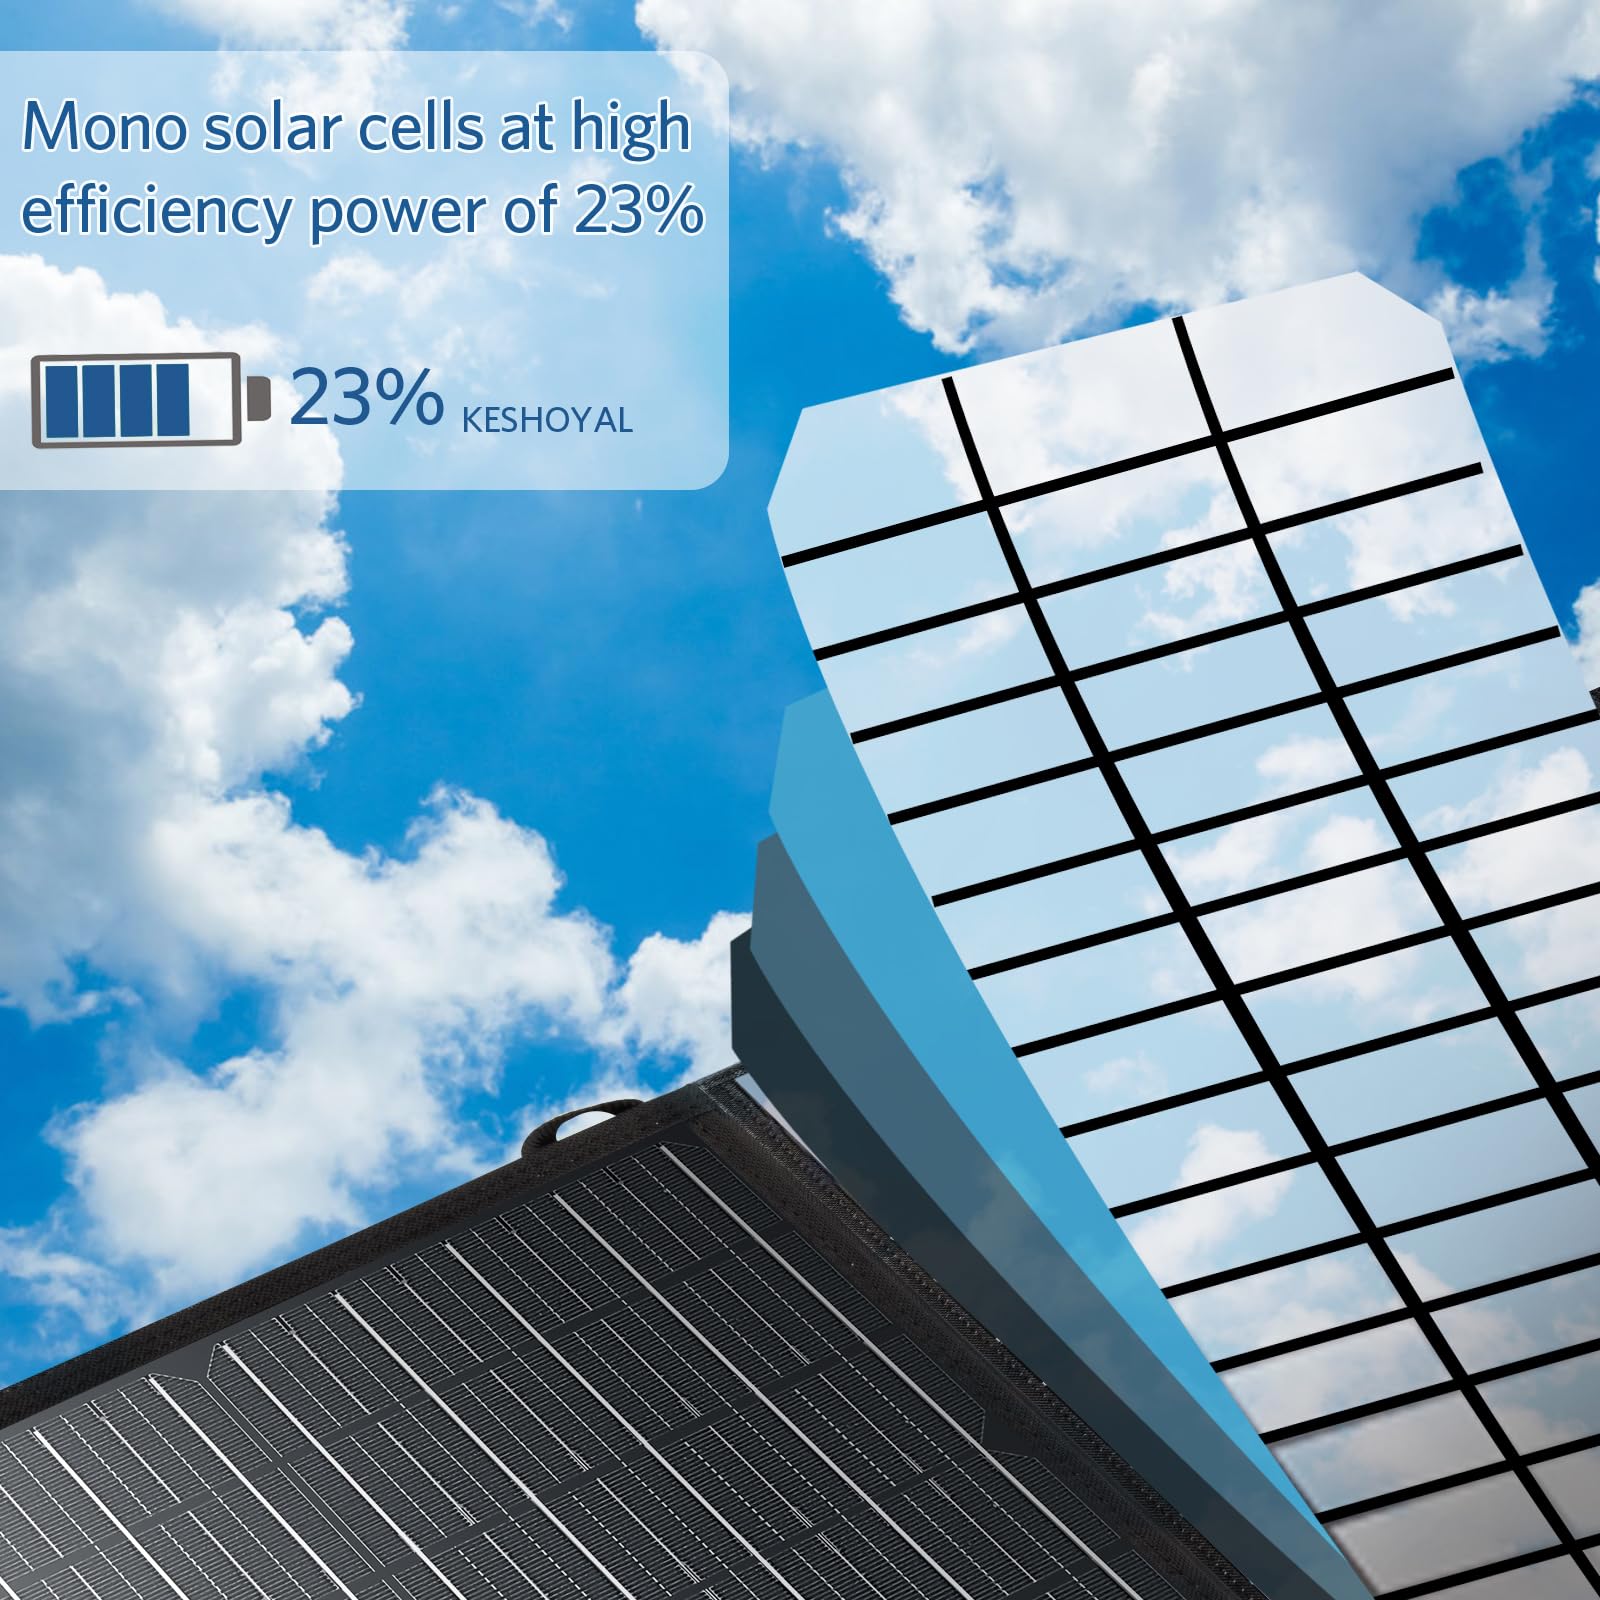 mono solar sells at high efficiency power of 23%